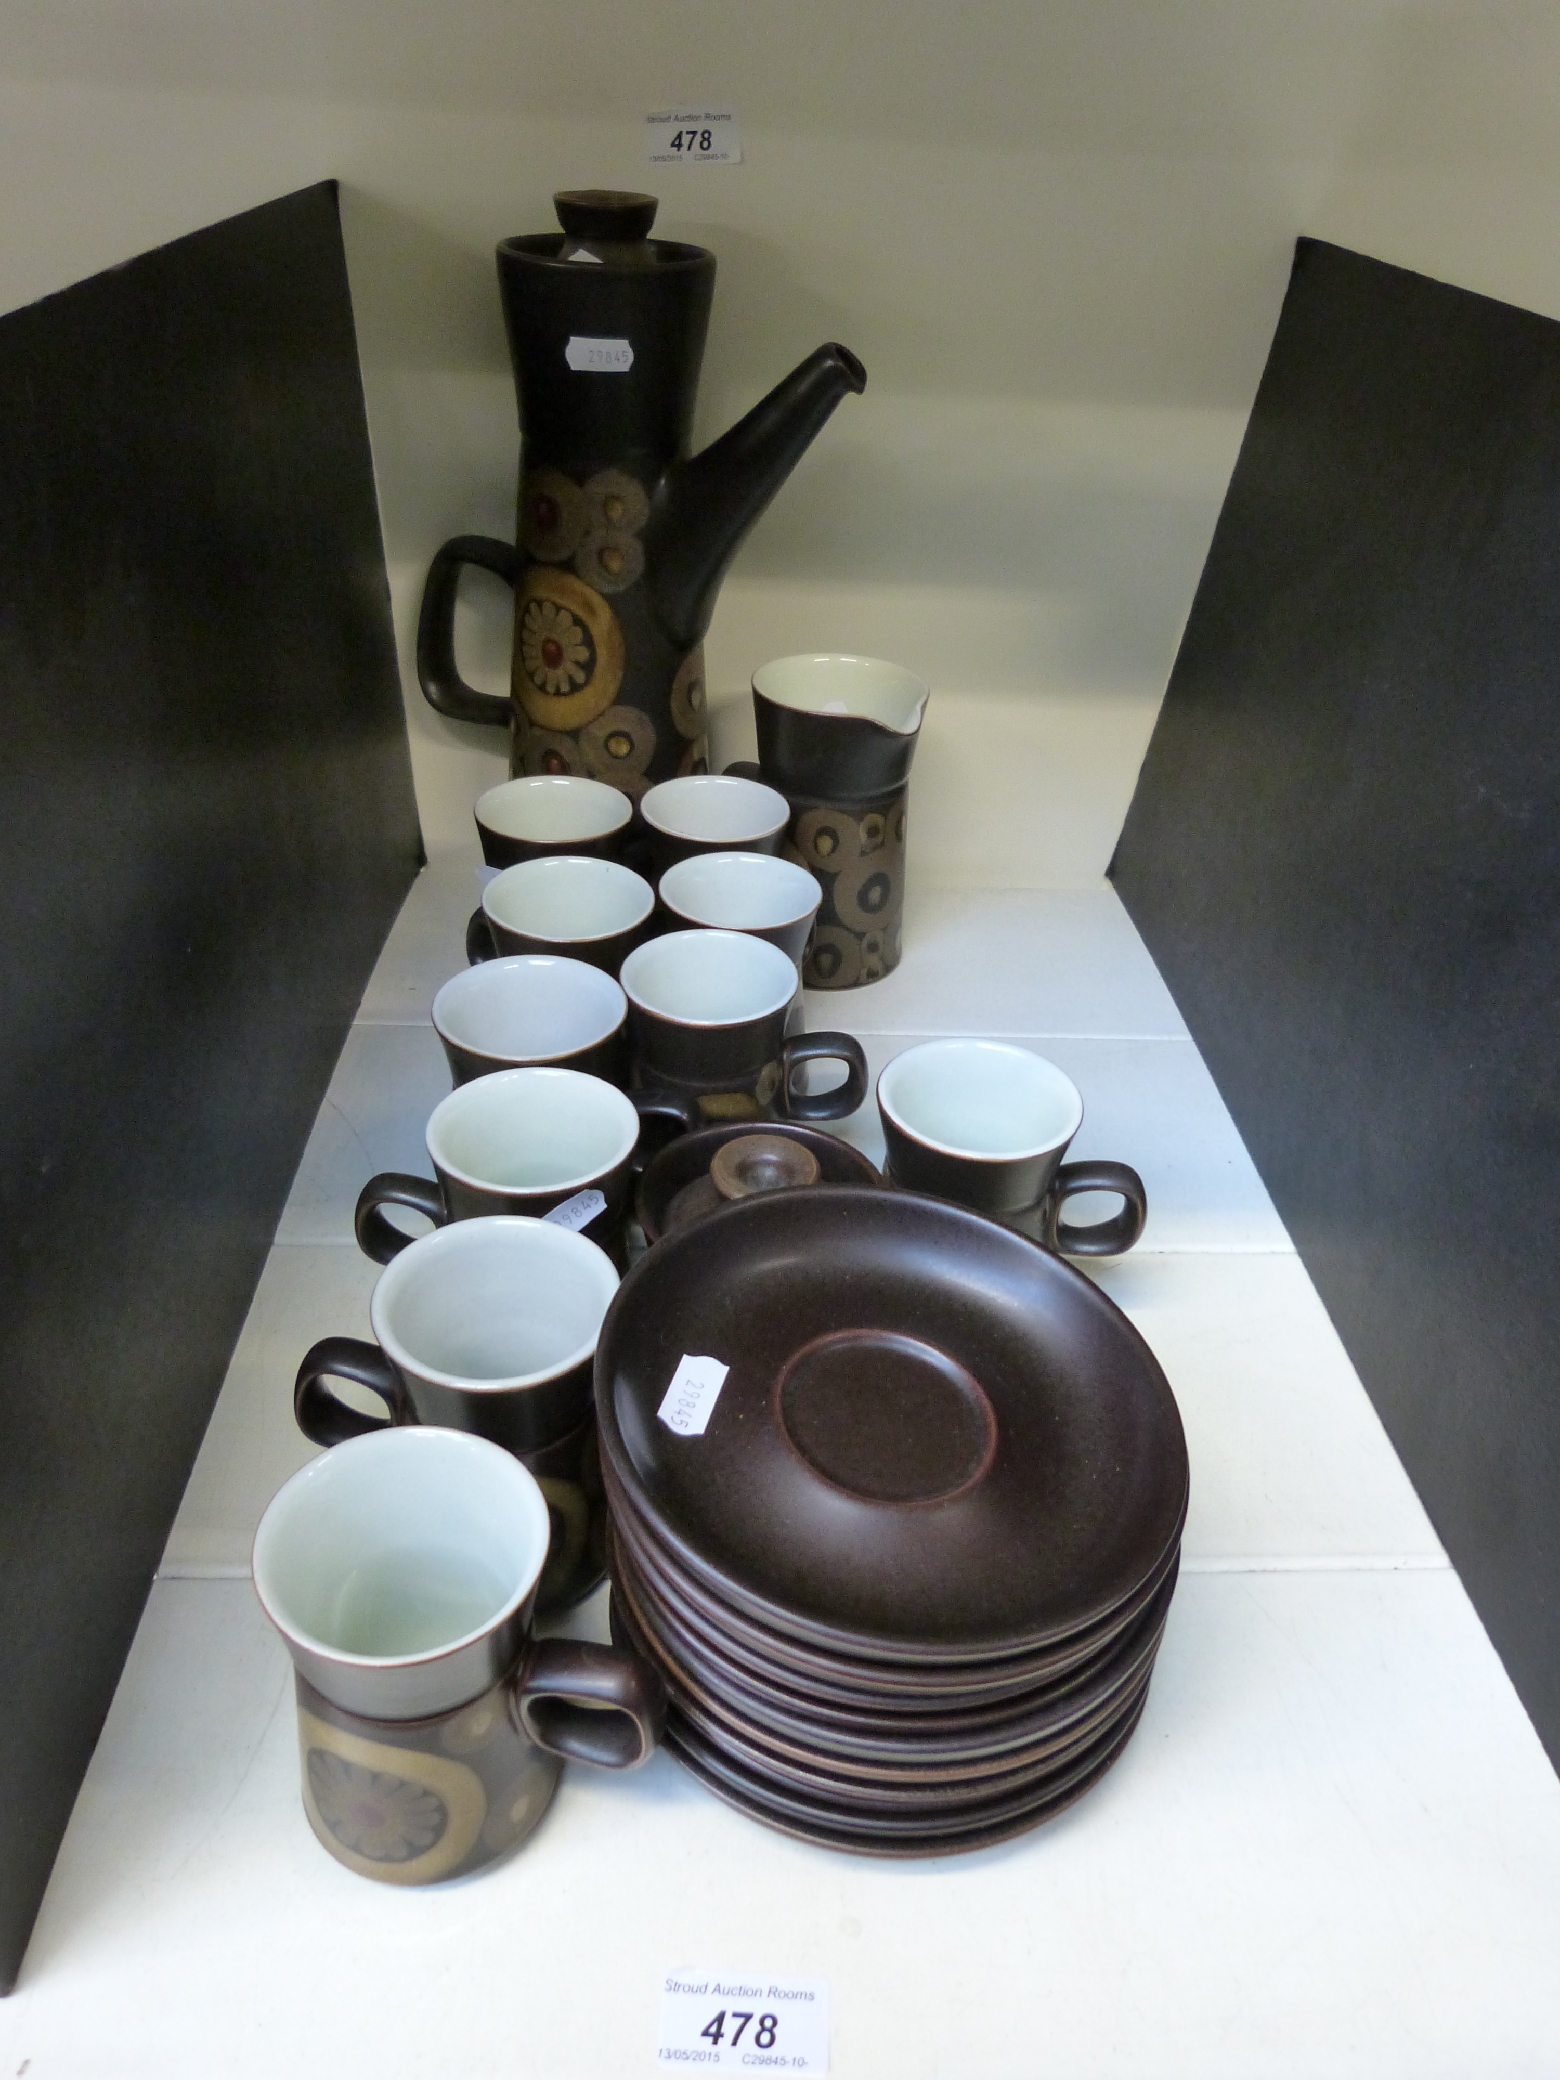 A Denby coffee set in the "Arabesque" pattern (ten mugs and saucers)